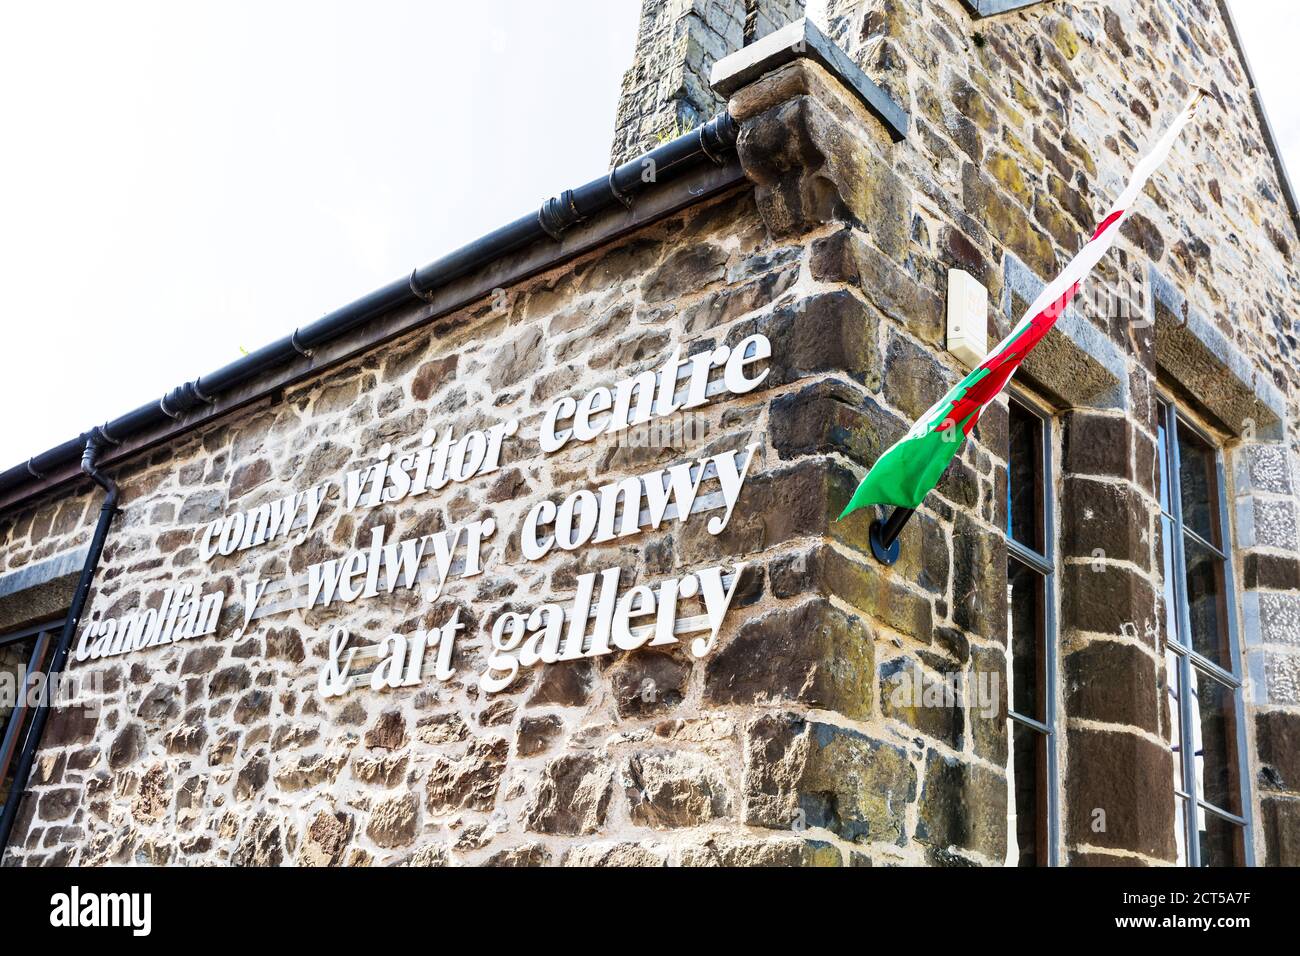 Conwy visitor centre, Conwy art gallery, Conwy, North Wales, UK, Conwy town, building, sign, signs, facade, exterior, tourism, Wales, Conwy Wales Stock Photo